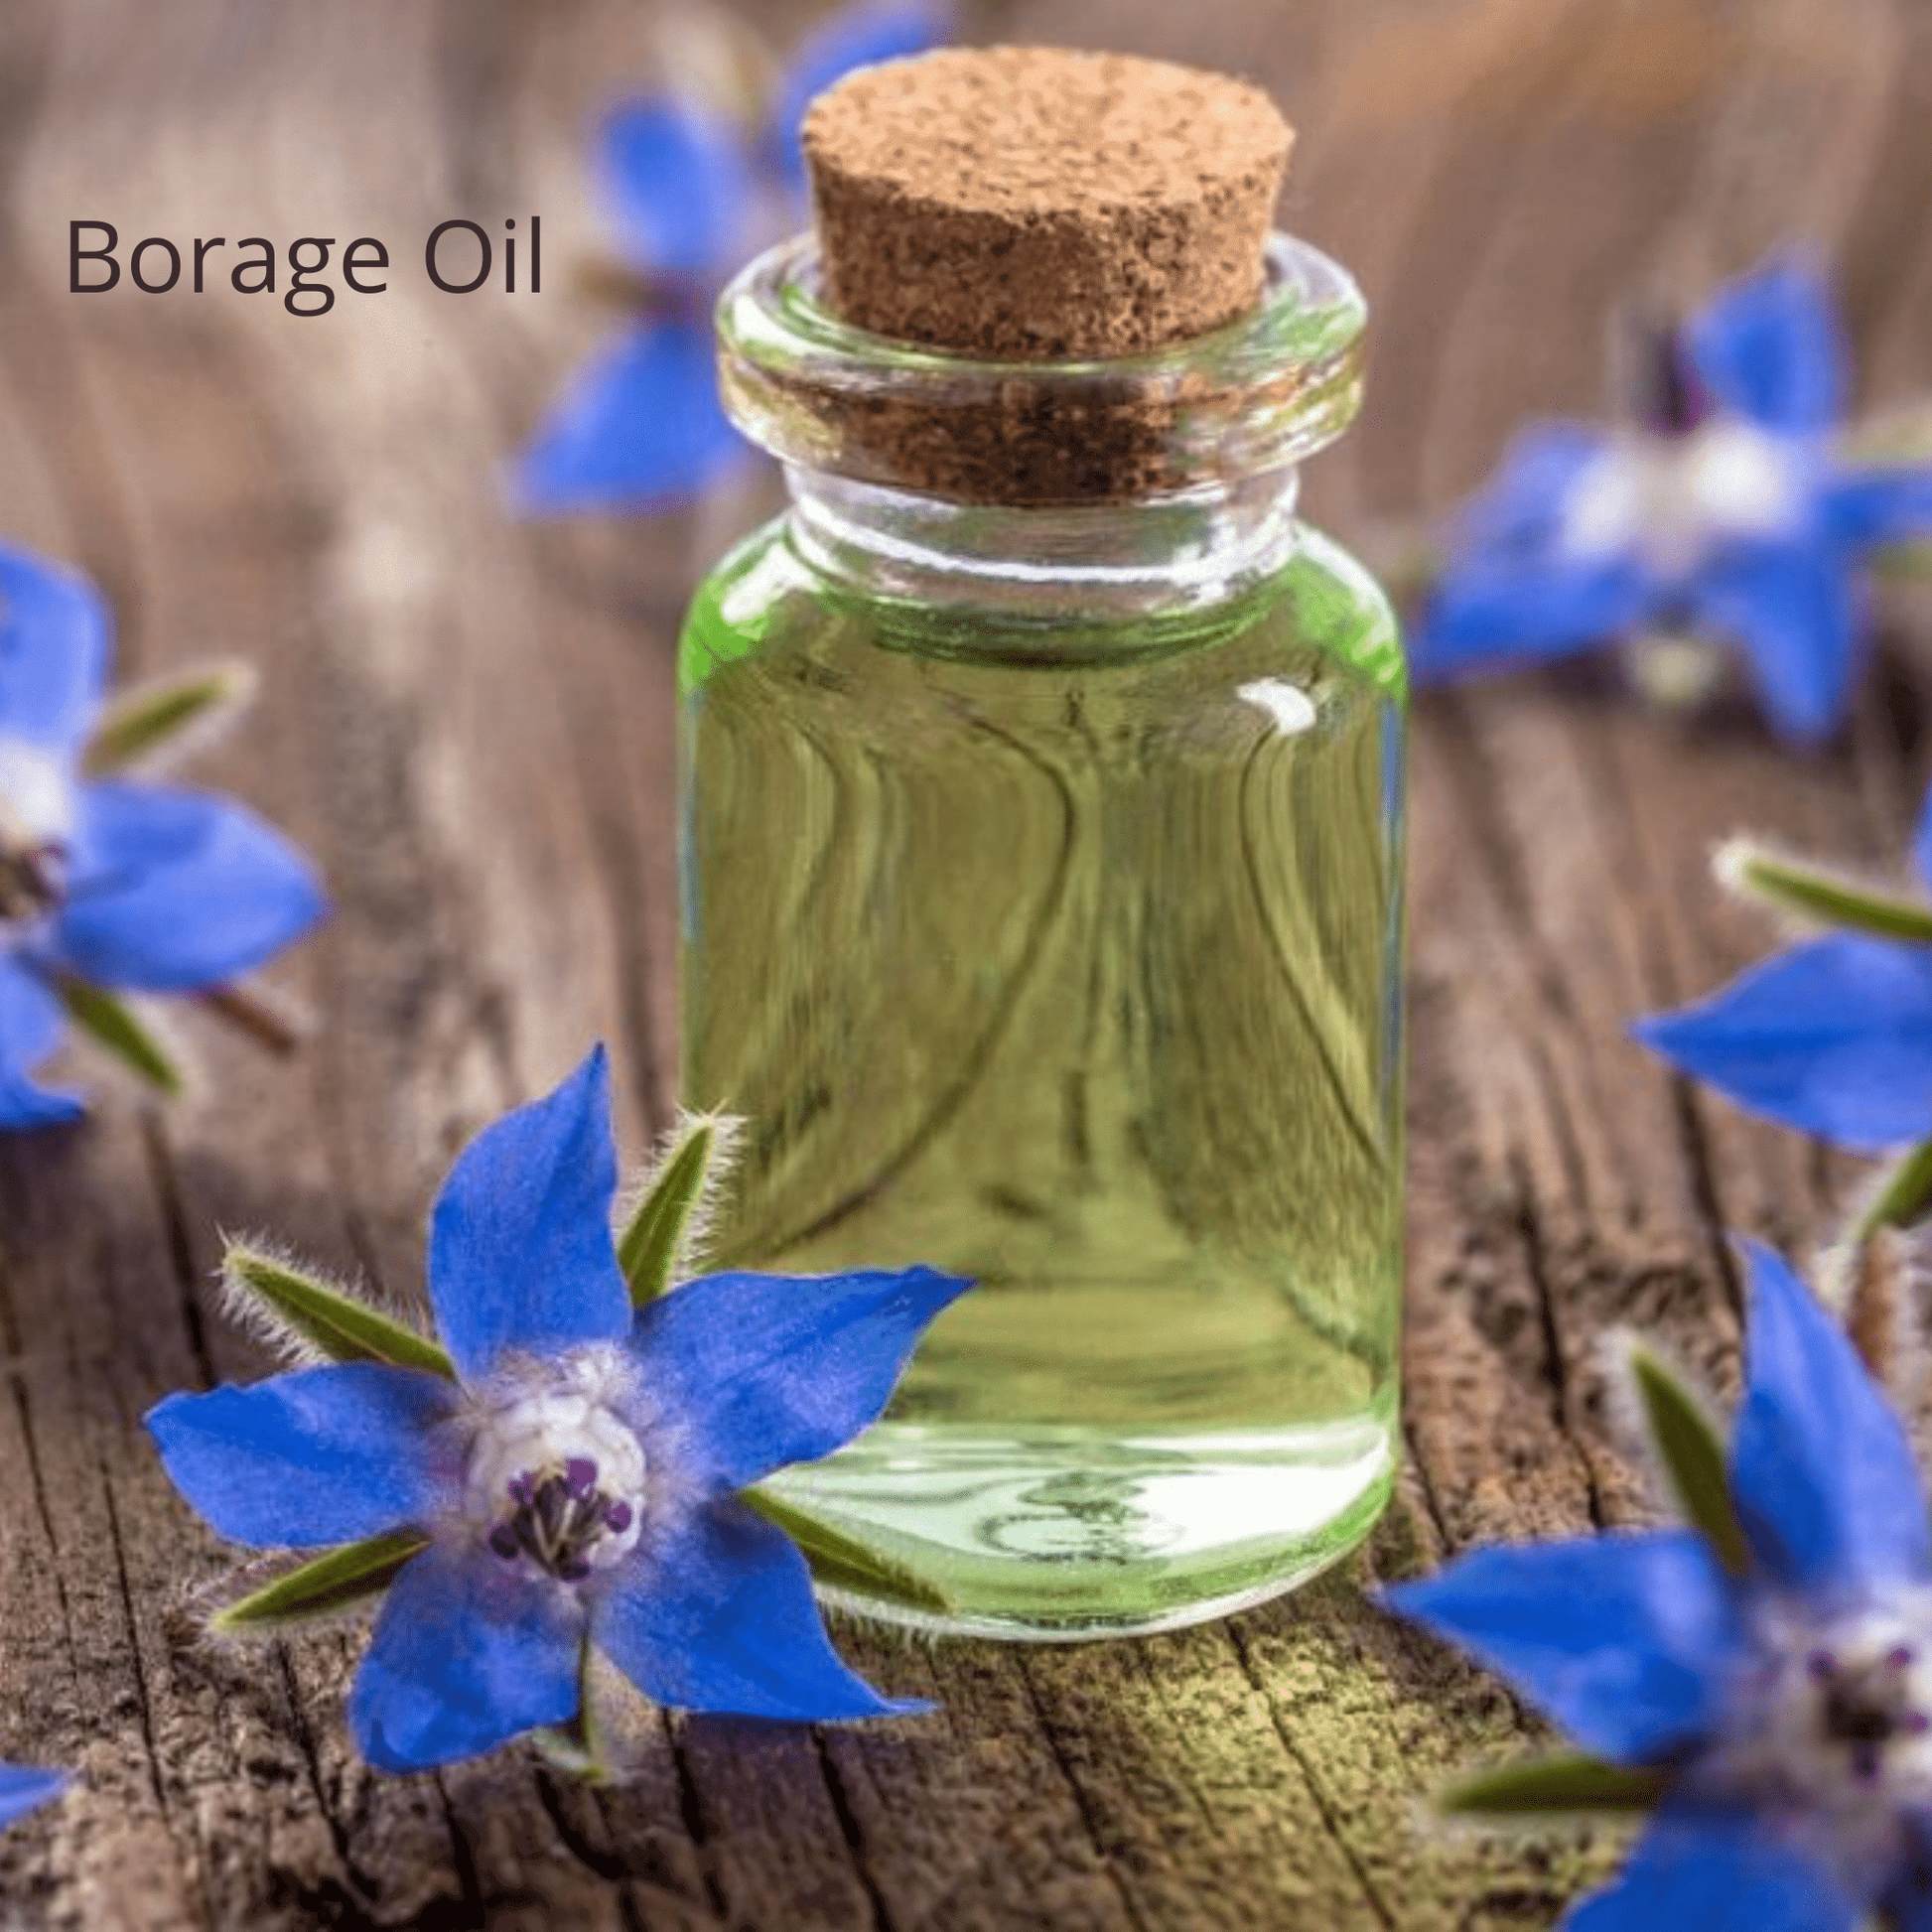 Be Green Bath and Body Serum for Dry/Normal/Mature Skin contains borage oil